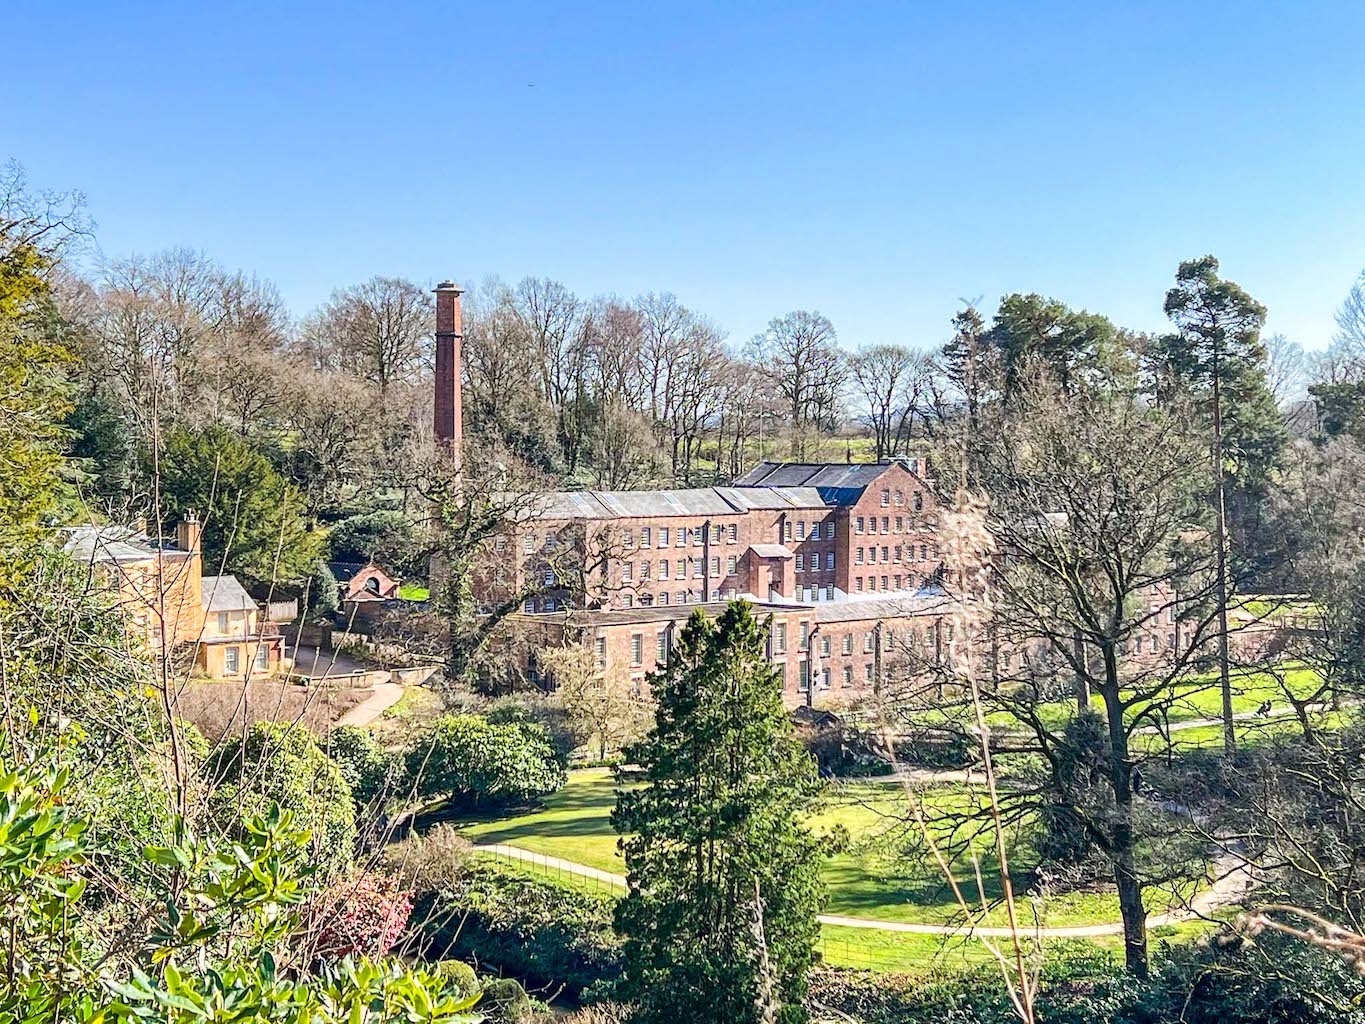 Things to do near Manchester Airport, Quarry Bank Mill House and Gardens